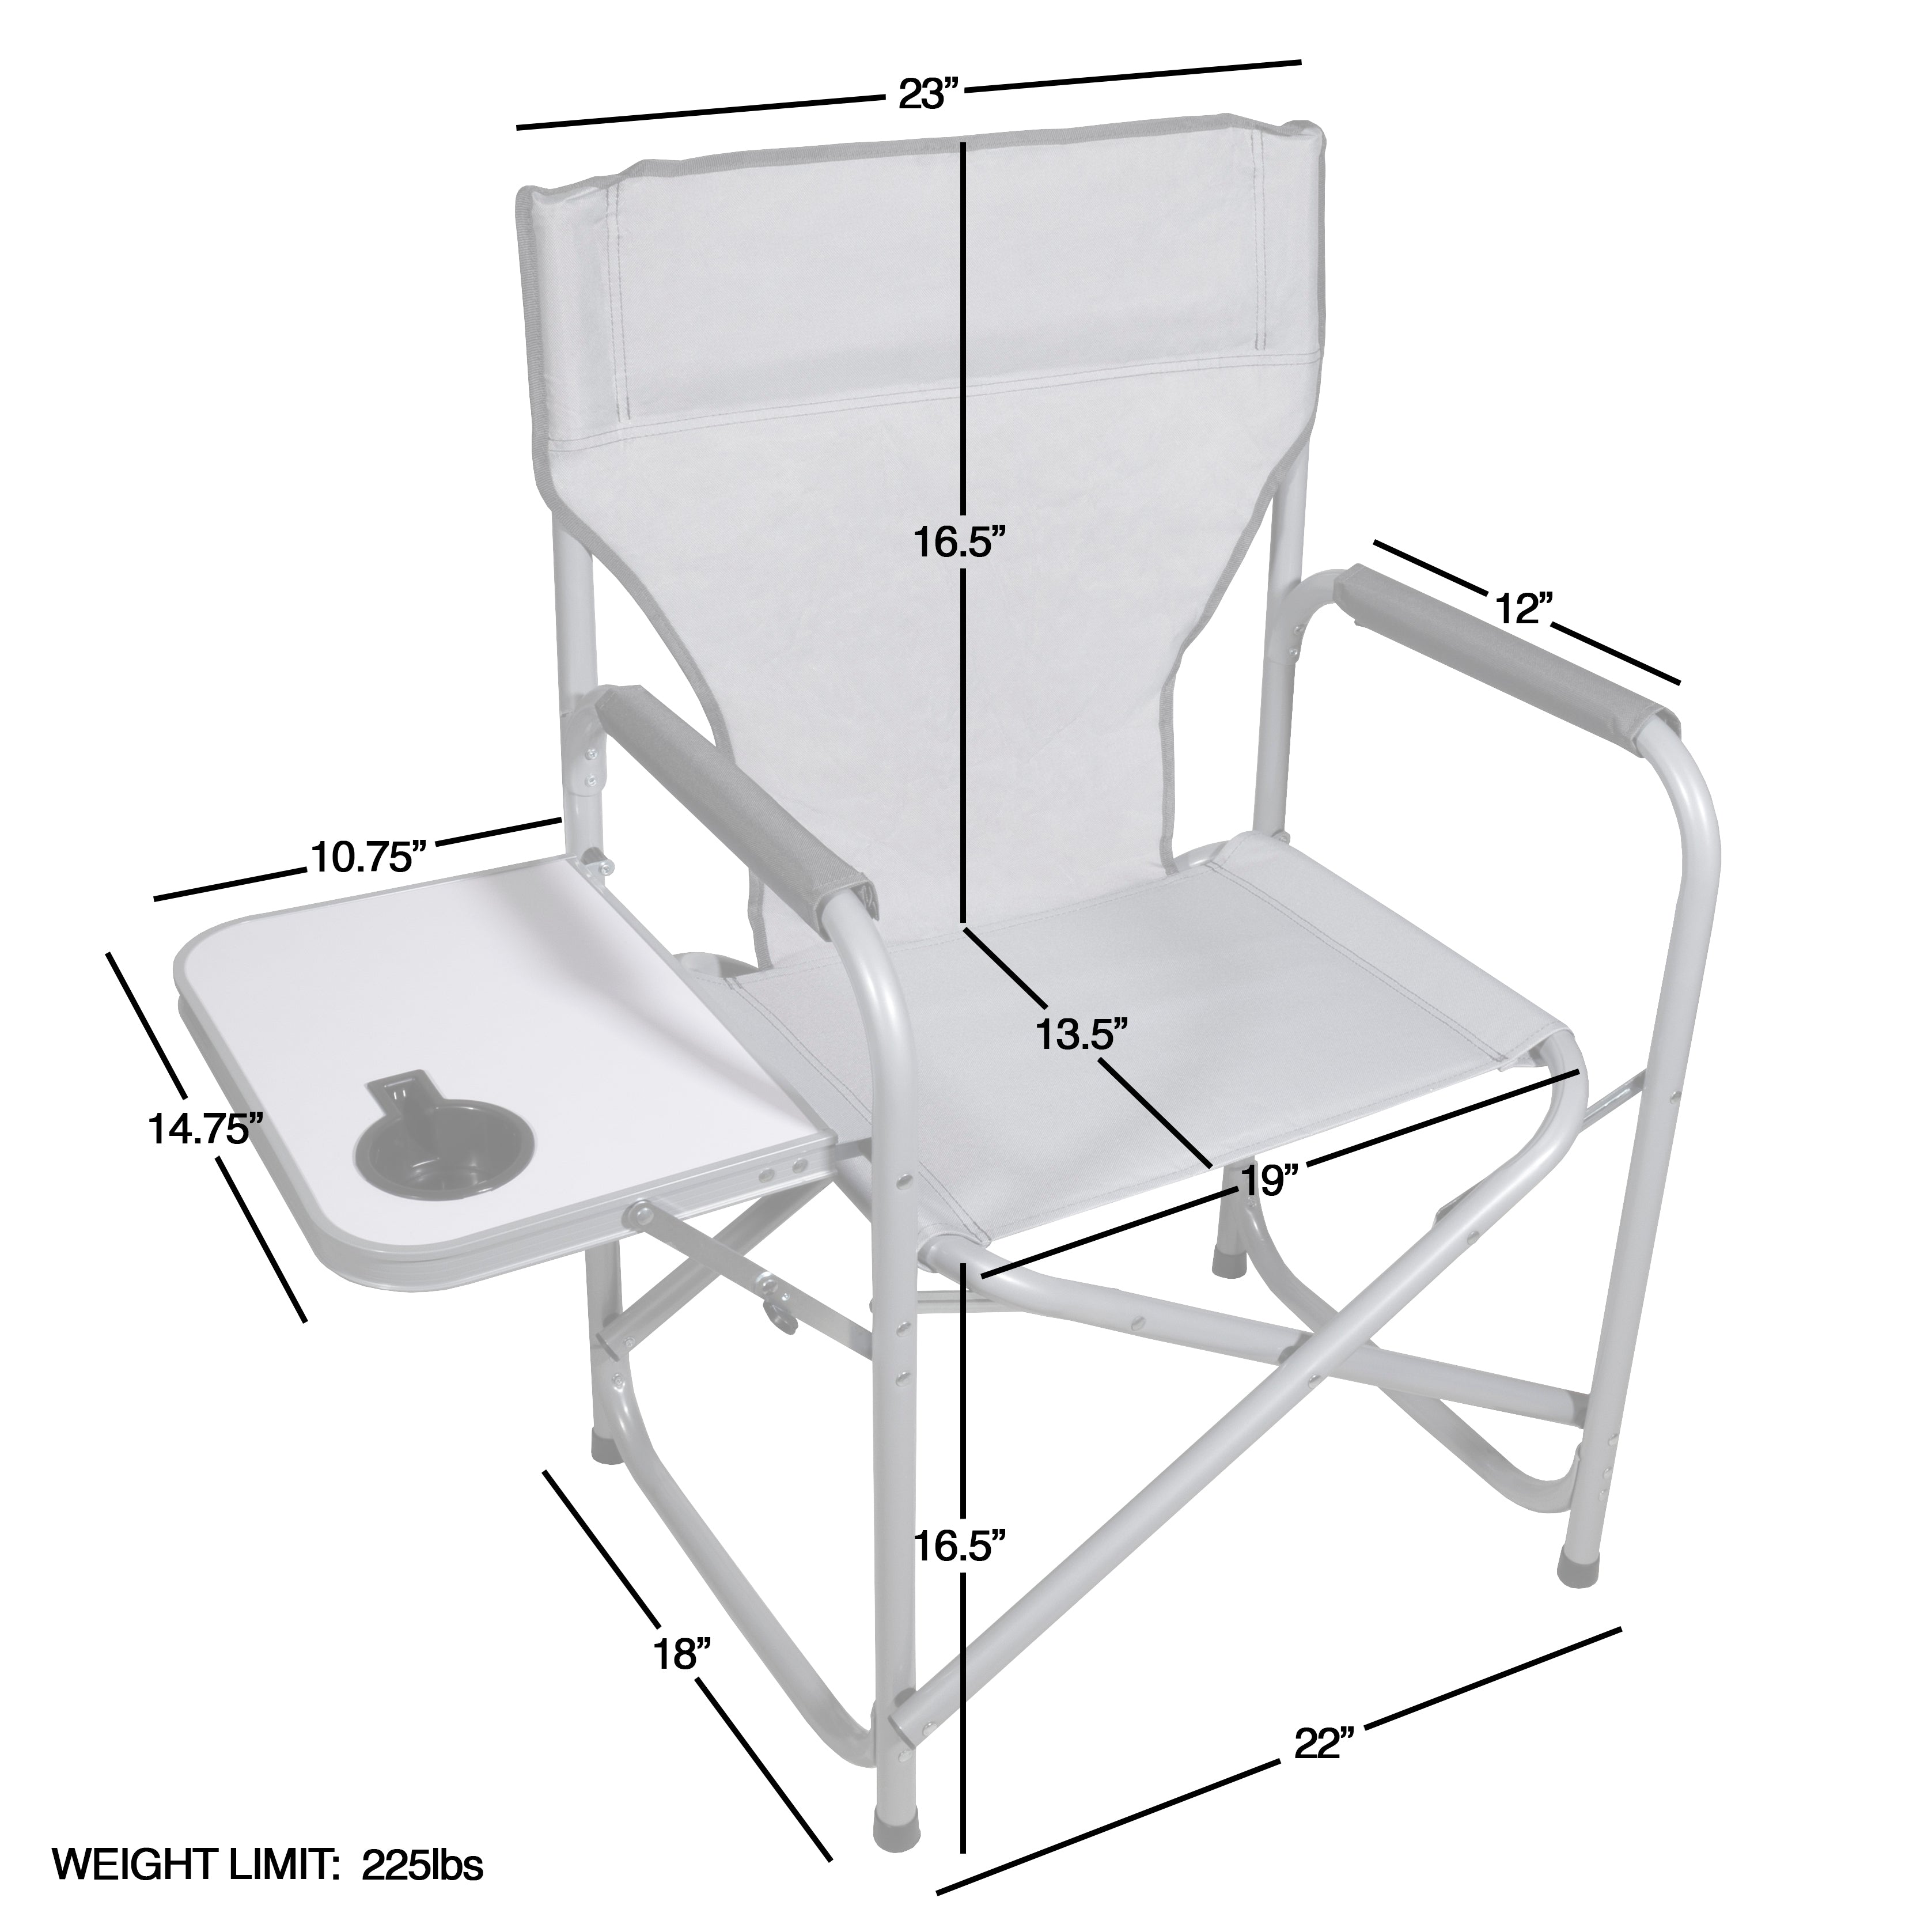 Zenithen Portable Outdoor Directors Folding Chair with Side Table, Light Gray